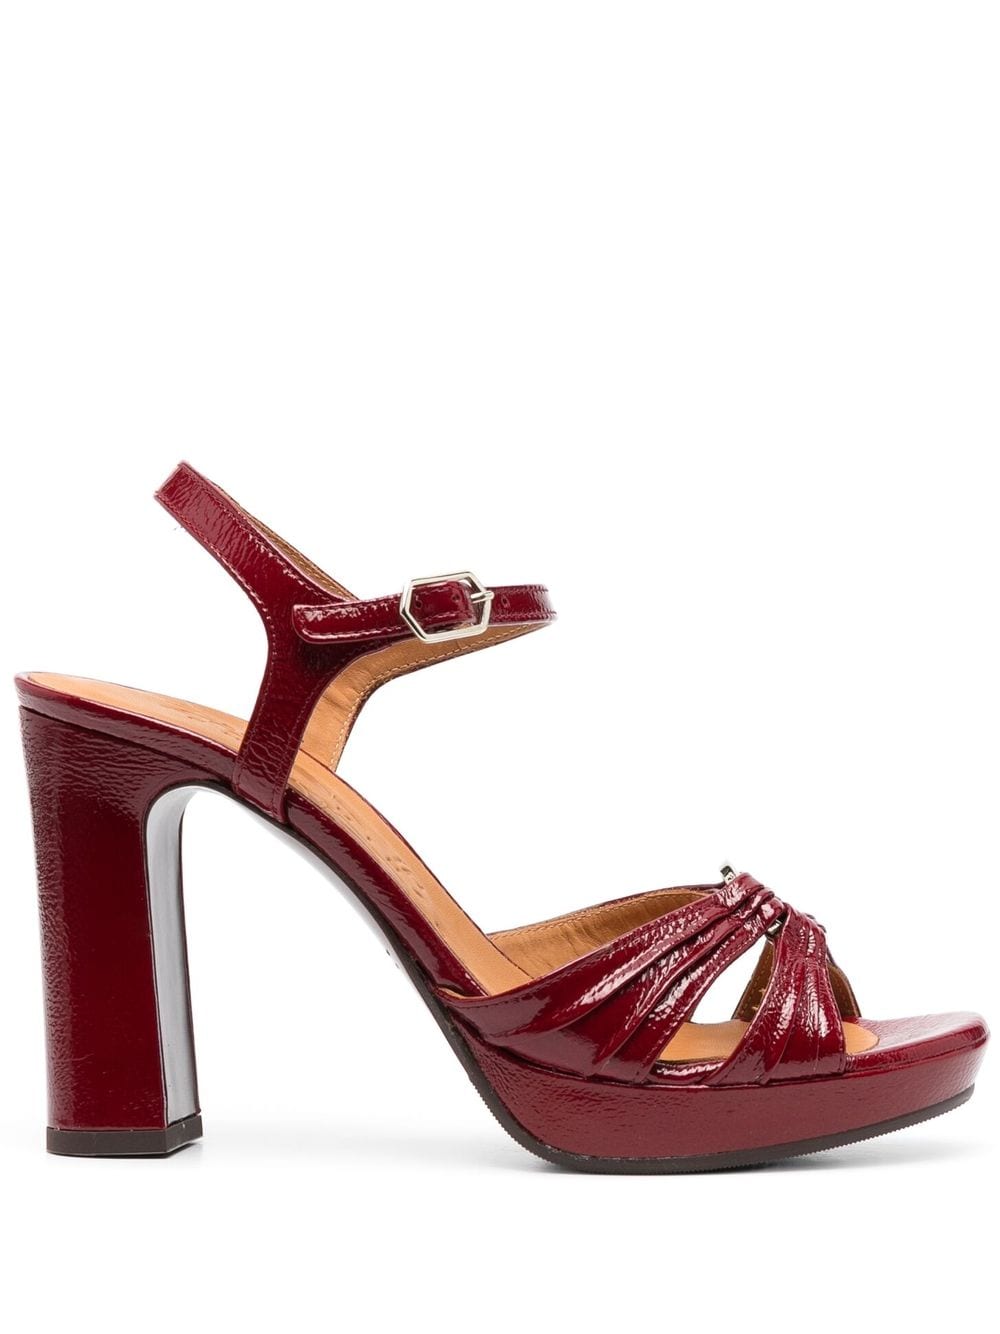 Chie Mihara Chiva Leather Sandals - Farfetch